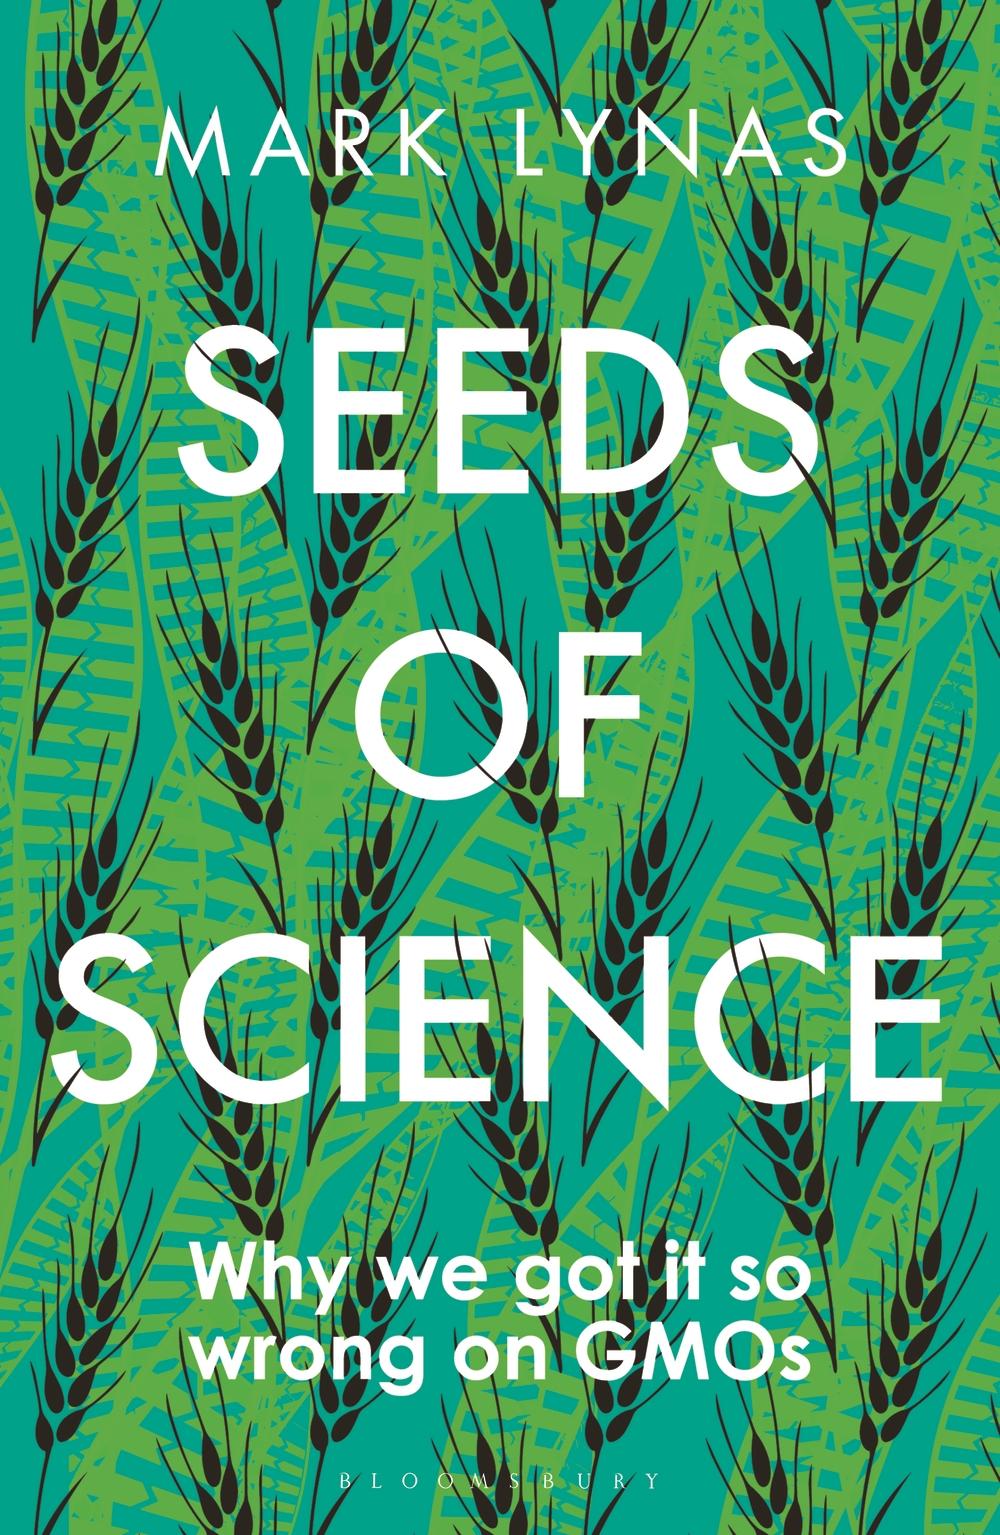 Seeds of Science - Mark Lynas